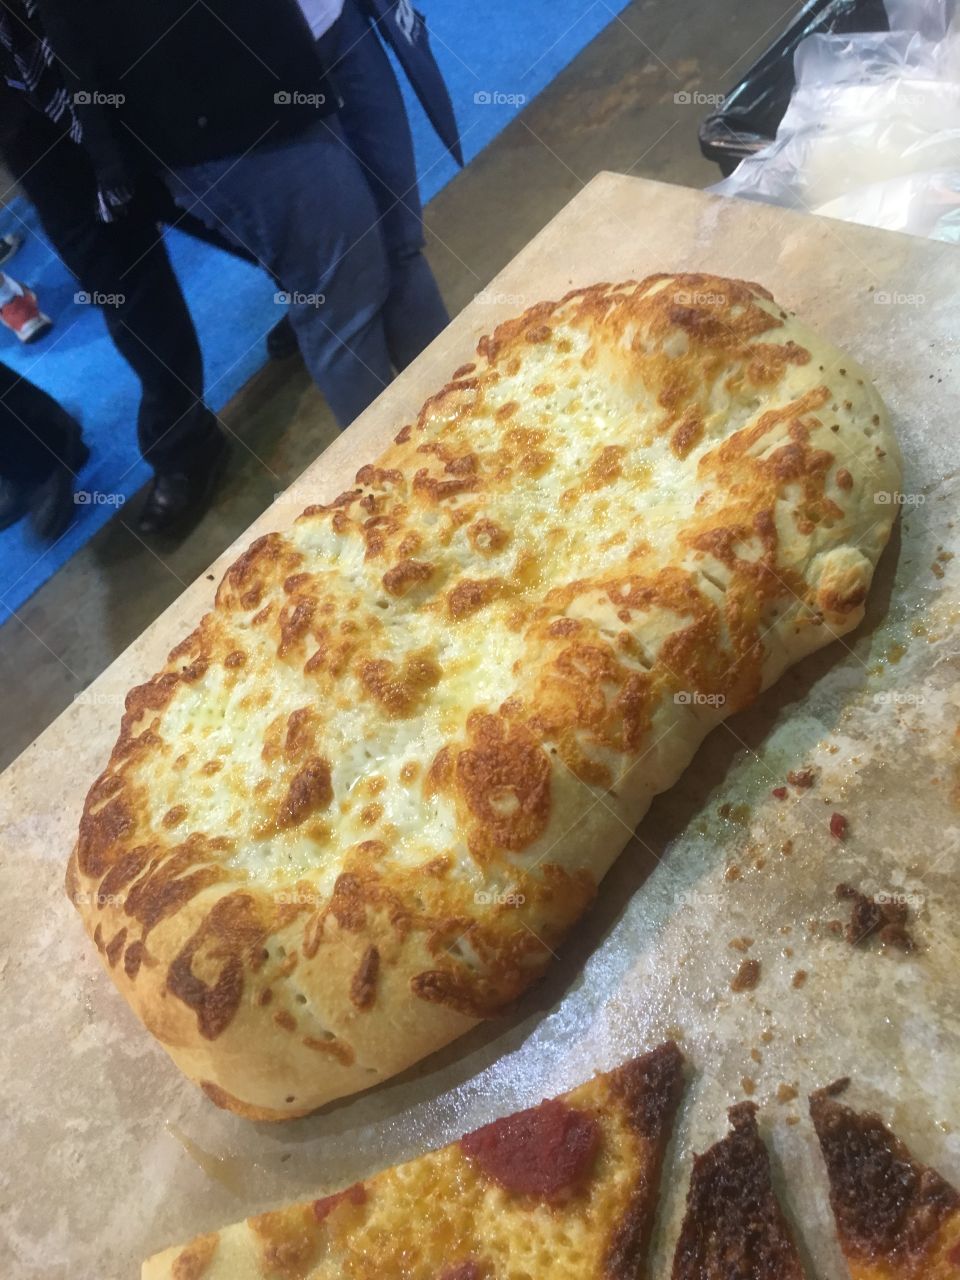 Right out of the oven cheese pizza